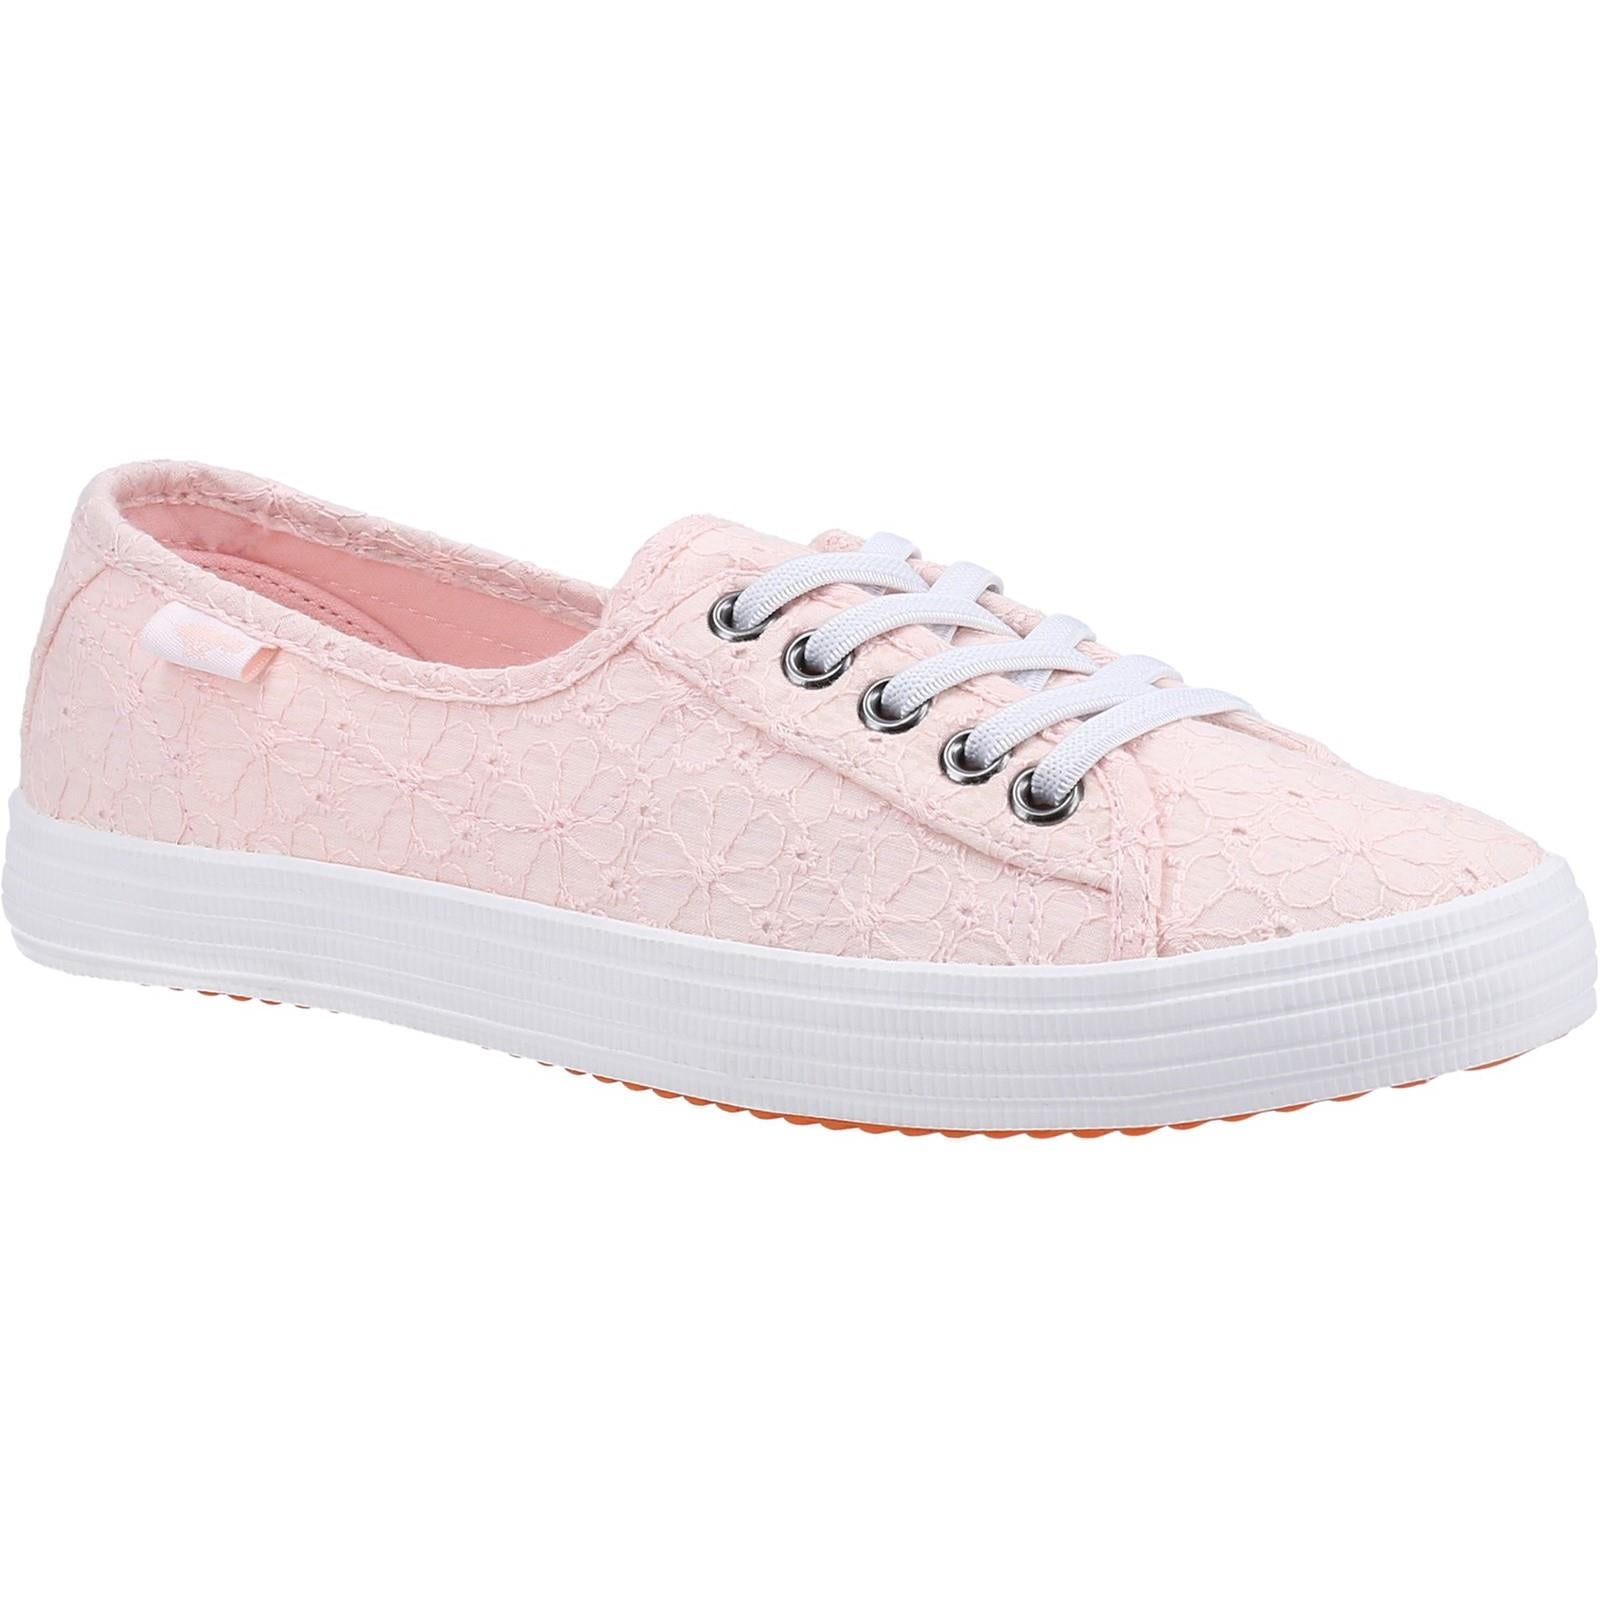 Rocket Dog Chow Chow Elsie pink floral ladies lace up plimsoll trainers shoes